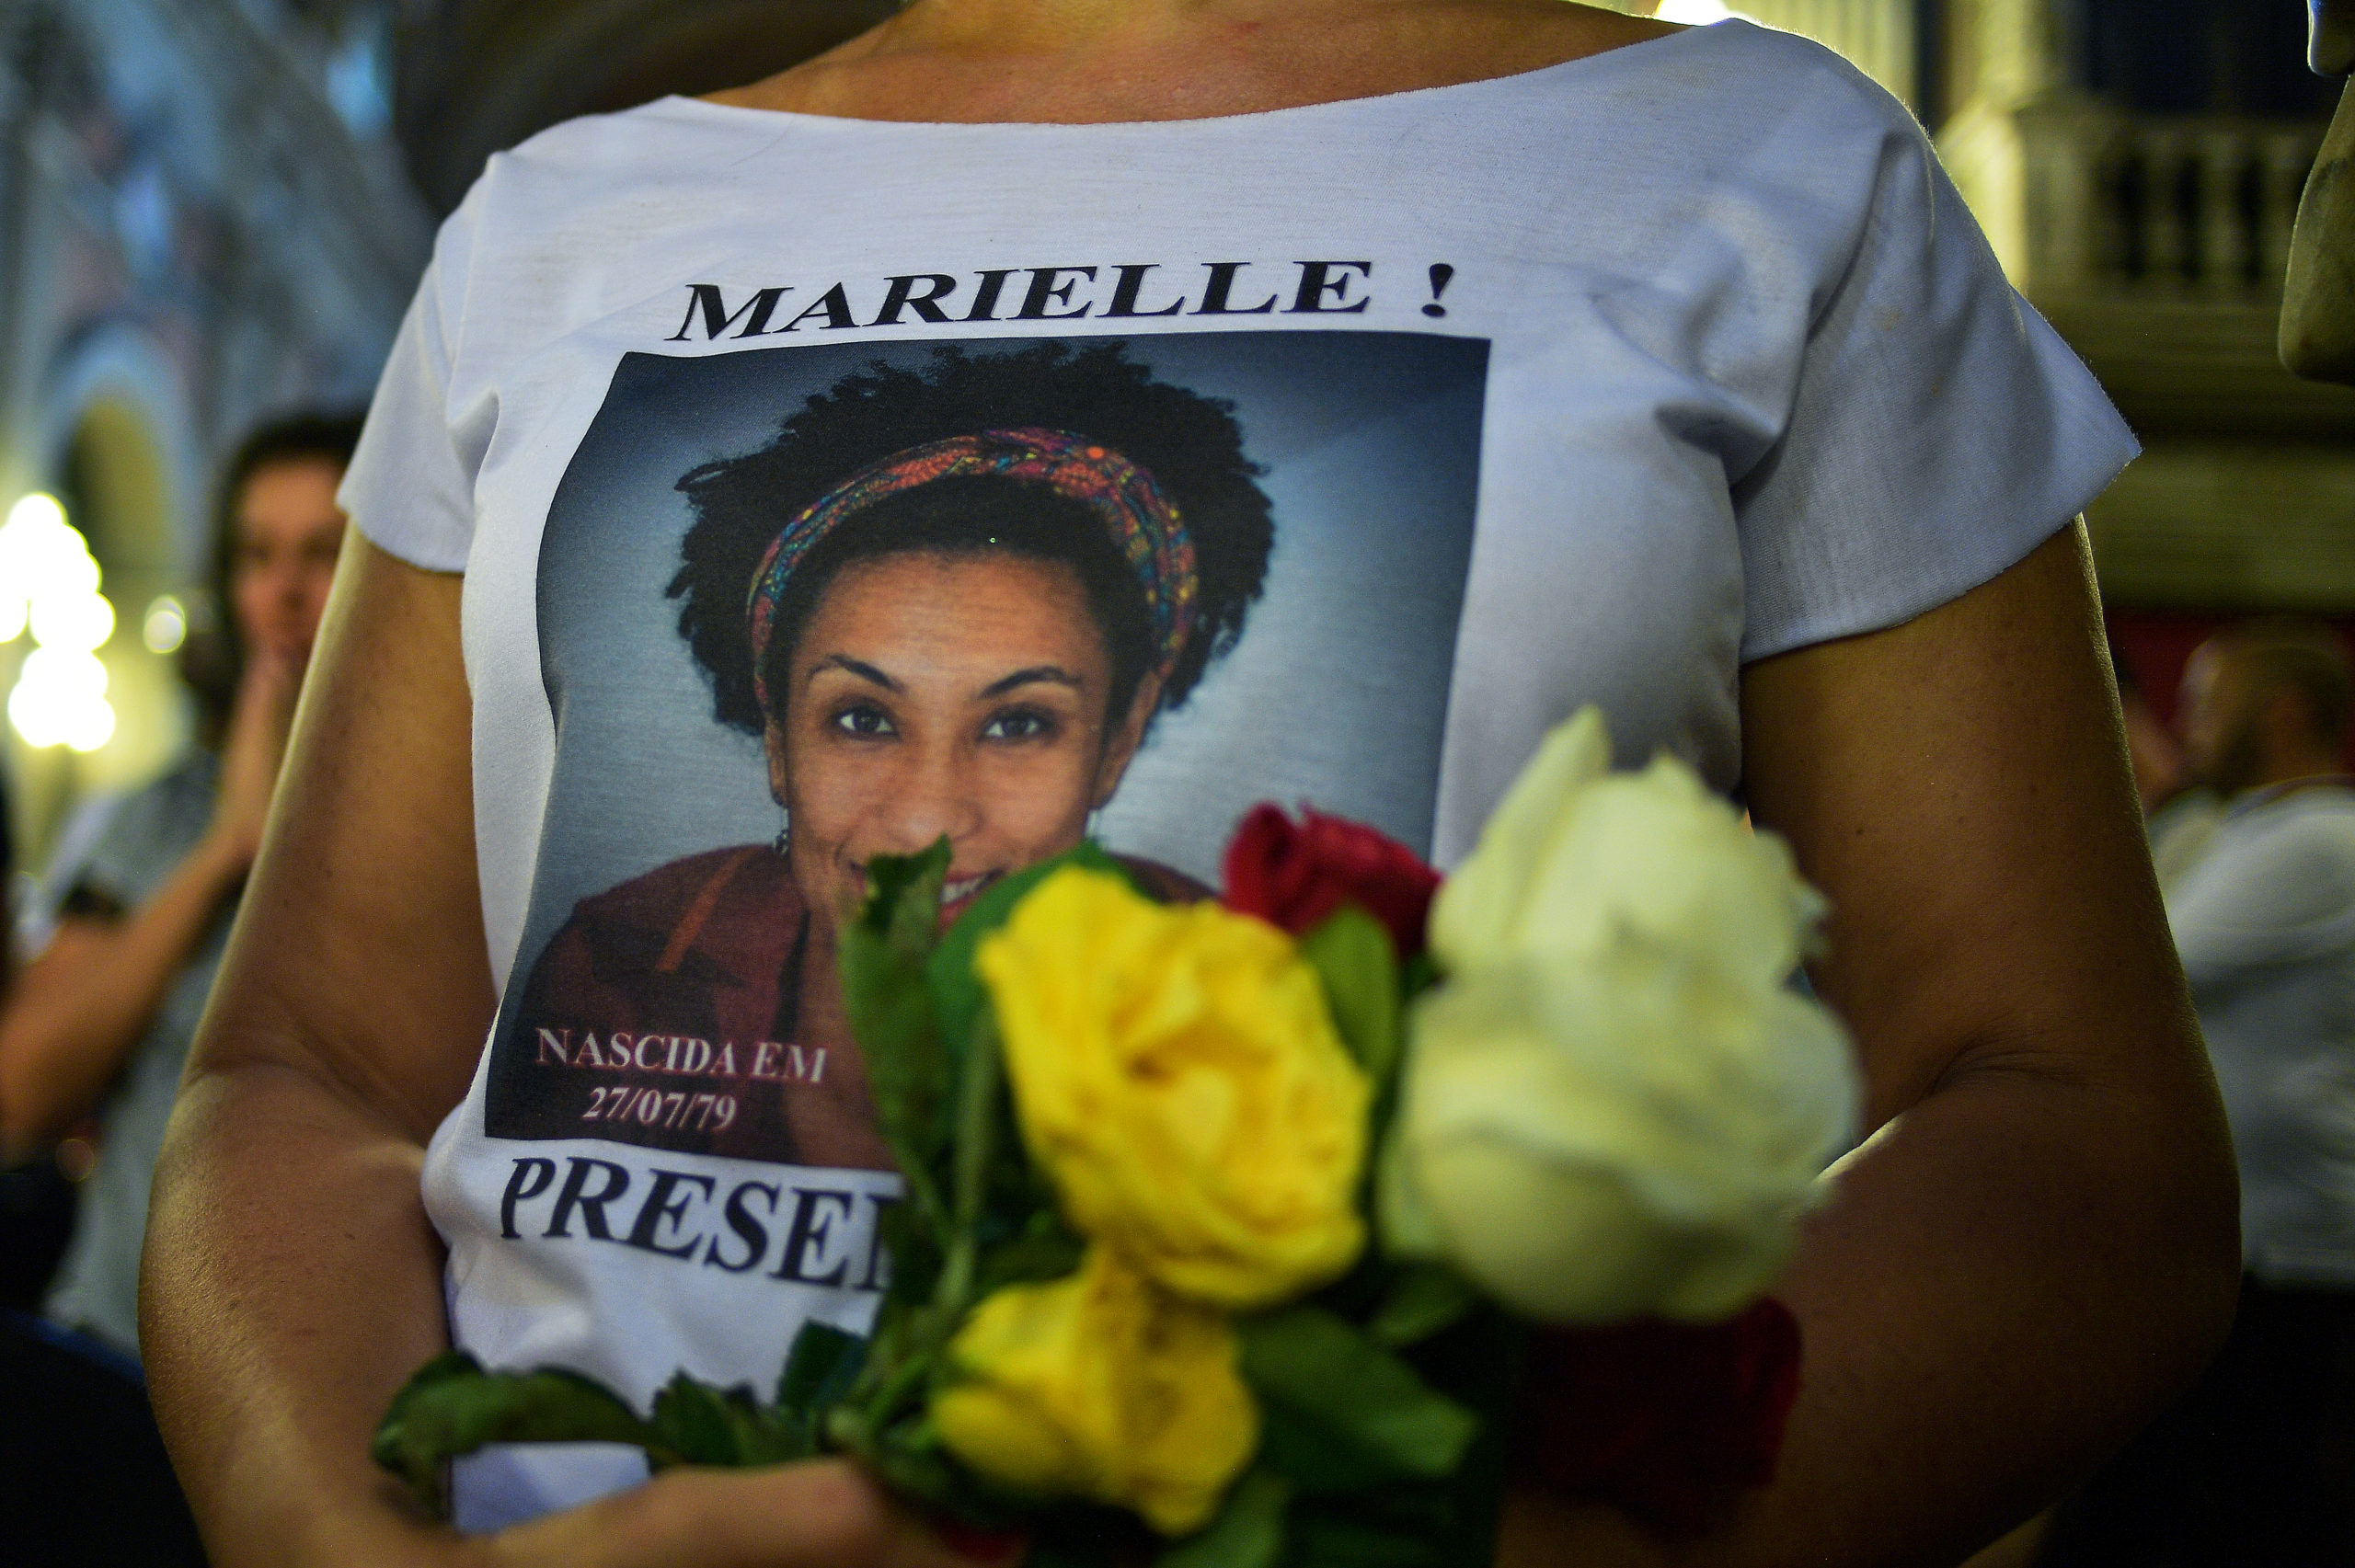 A woman wears a t-shirt bearing the portrait of slain Brazilian councilwoman Marielle Franco, during a mass celebration on the first anniversary of her death in Rio de Janeiro, Brazil on March 14, 2019. - Franco was a black gay rights activist who was an outspoken critic of police brutality and defender of the poor. A year after her murder shocked Brazil, two police officers were arrested in the case, but the motivation of the crime remains unknown. (Photo by CARL DE SOUZA / AFP)